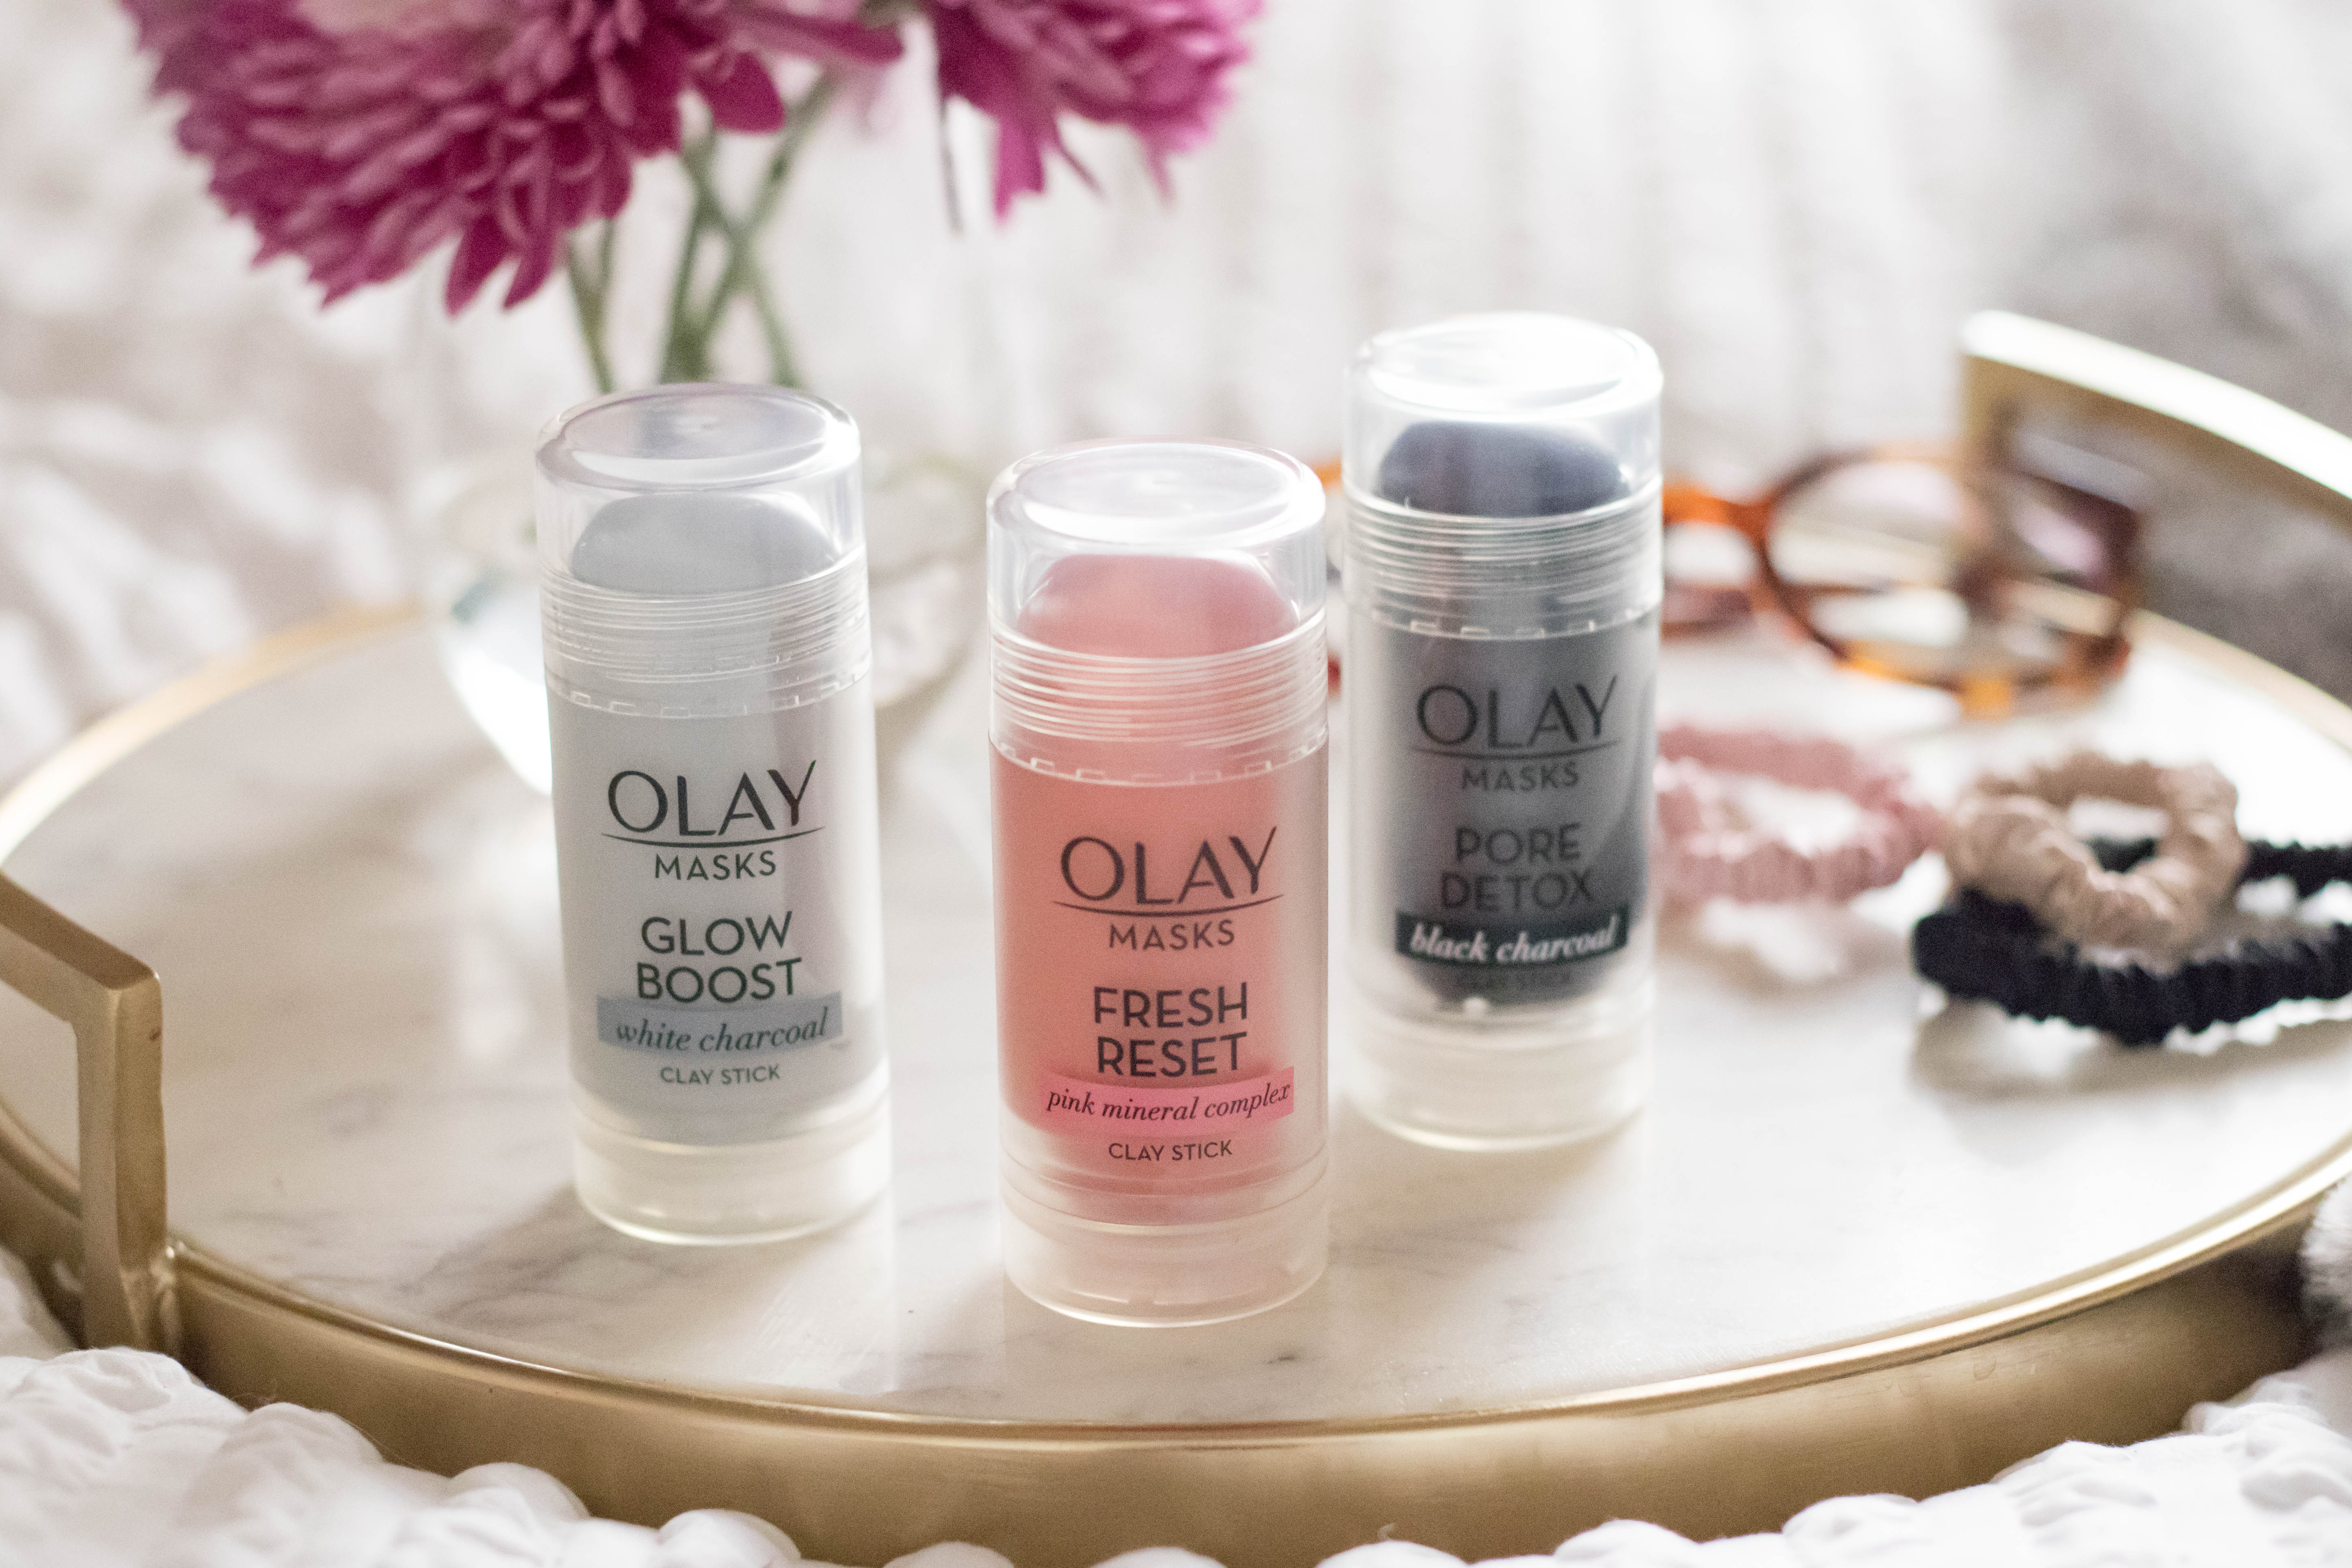 new olay stick clay masks review #olay #selfcare #skincare #facemask